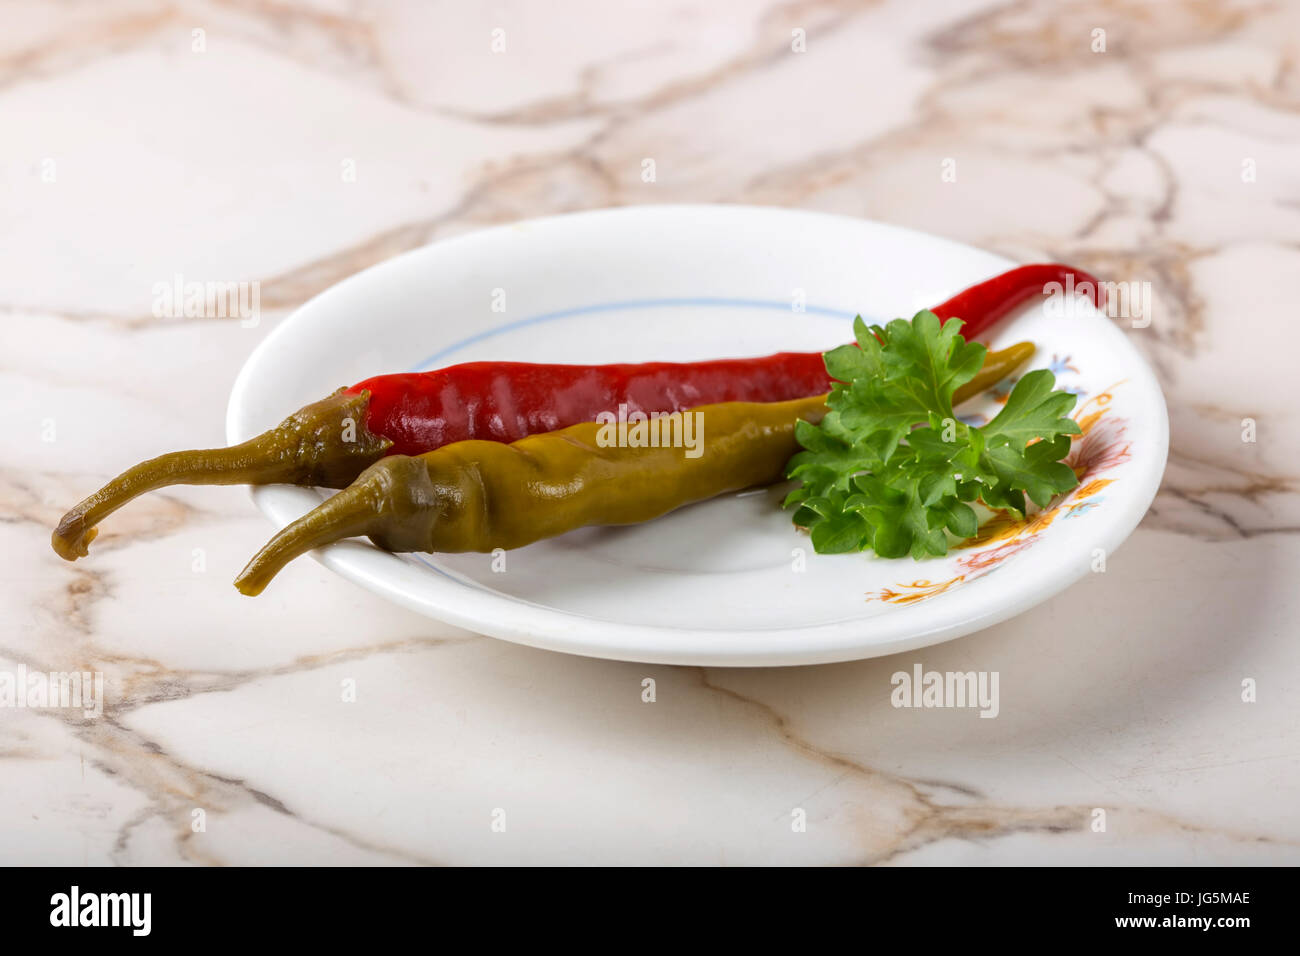 Pickled green and red pepperoni pepper in plate on the table with parsley Stock Photo